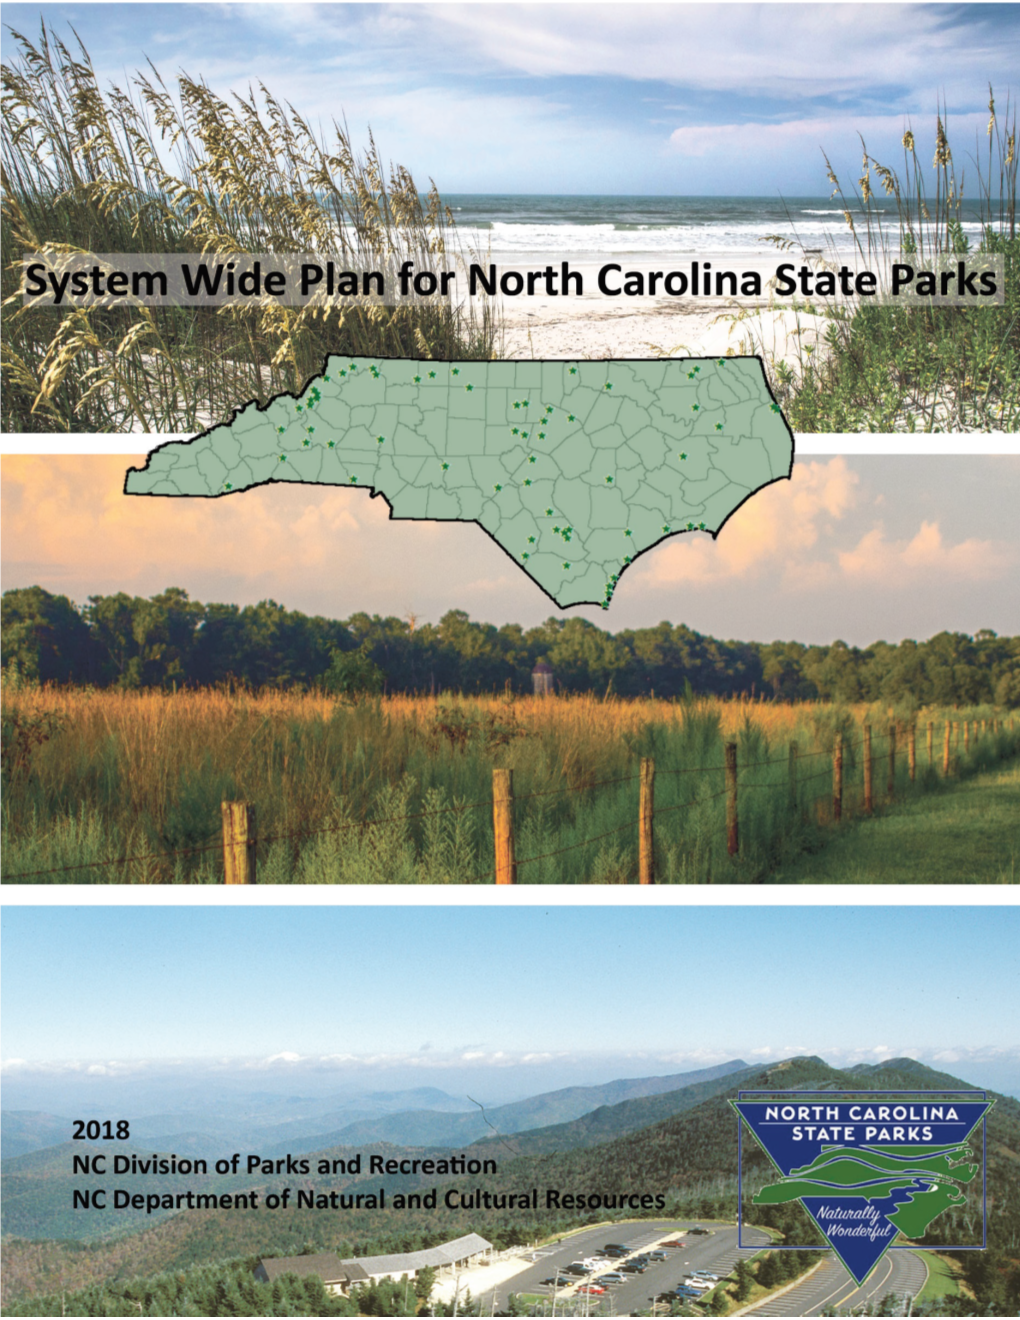 CHAPTER 4 TRENDS AFFECTING OUTDOOR RECREATION in the STATE PARKS SYSTEM North Carolina’S Population and Landscape Are Always Changing